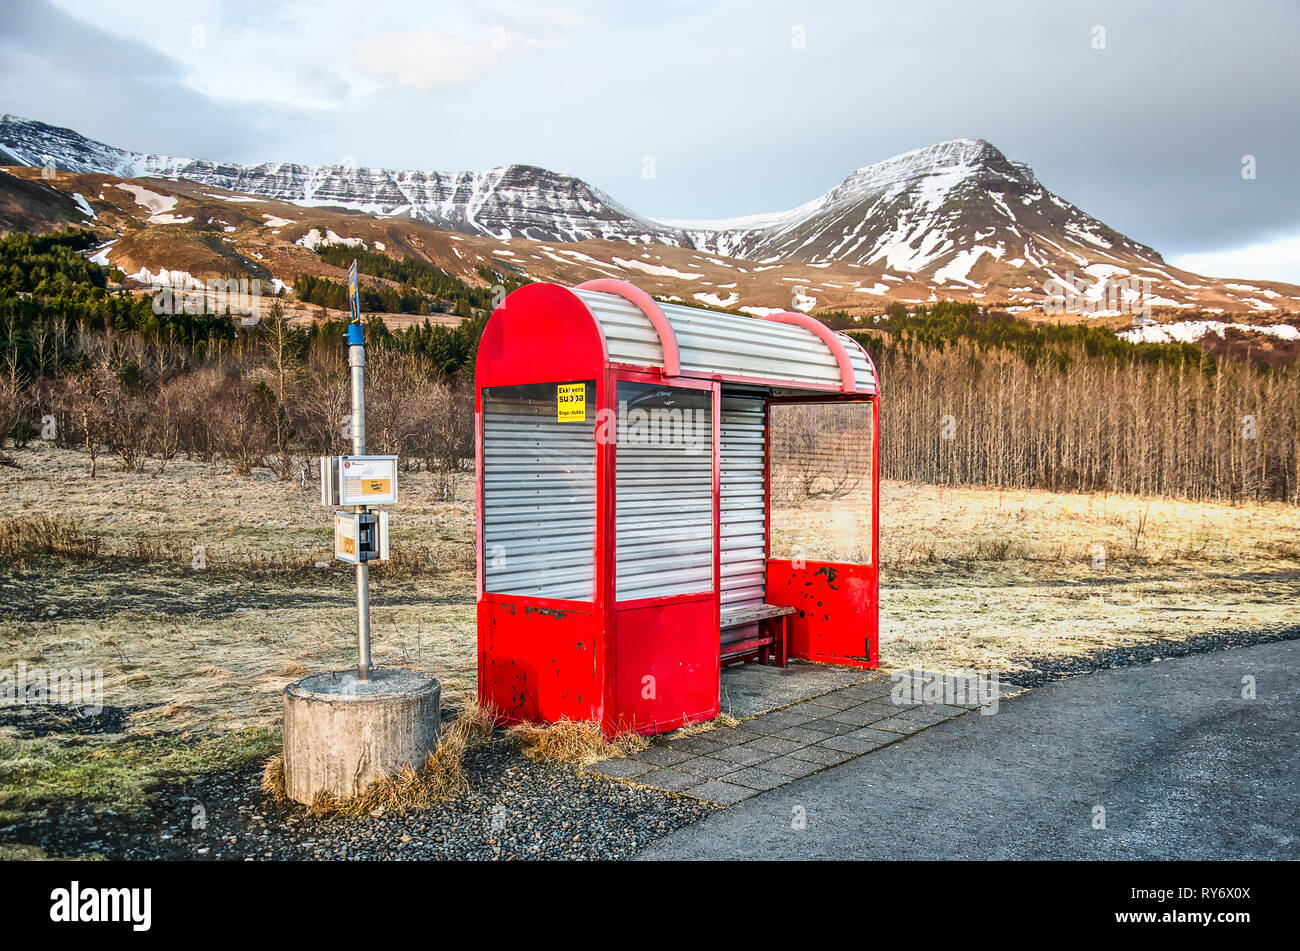 Mossfellsbaer, Iceland, February 28, 2019: a red public bus shelter catches the last rays of the sun in a beautiful mountain landscape near Mount Esja Stock Photo